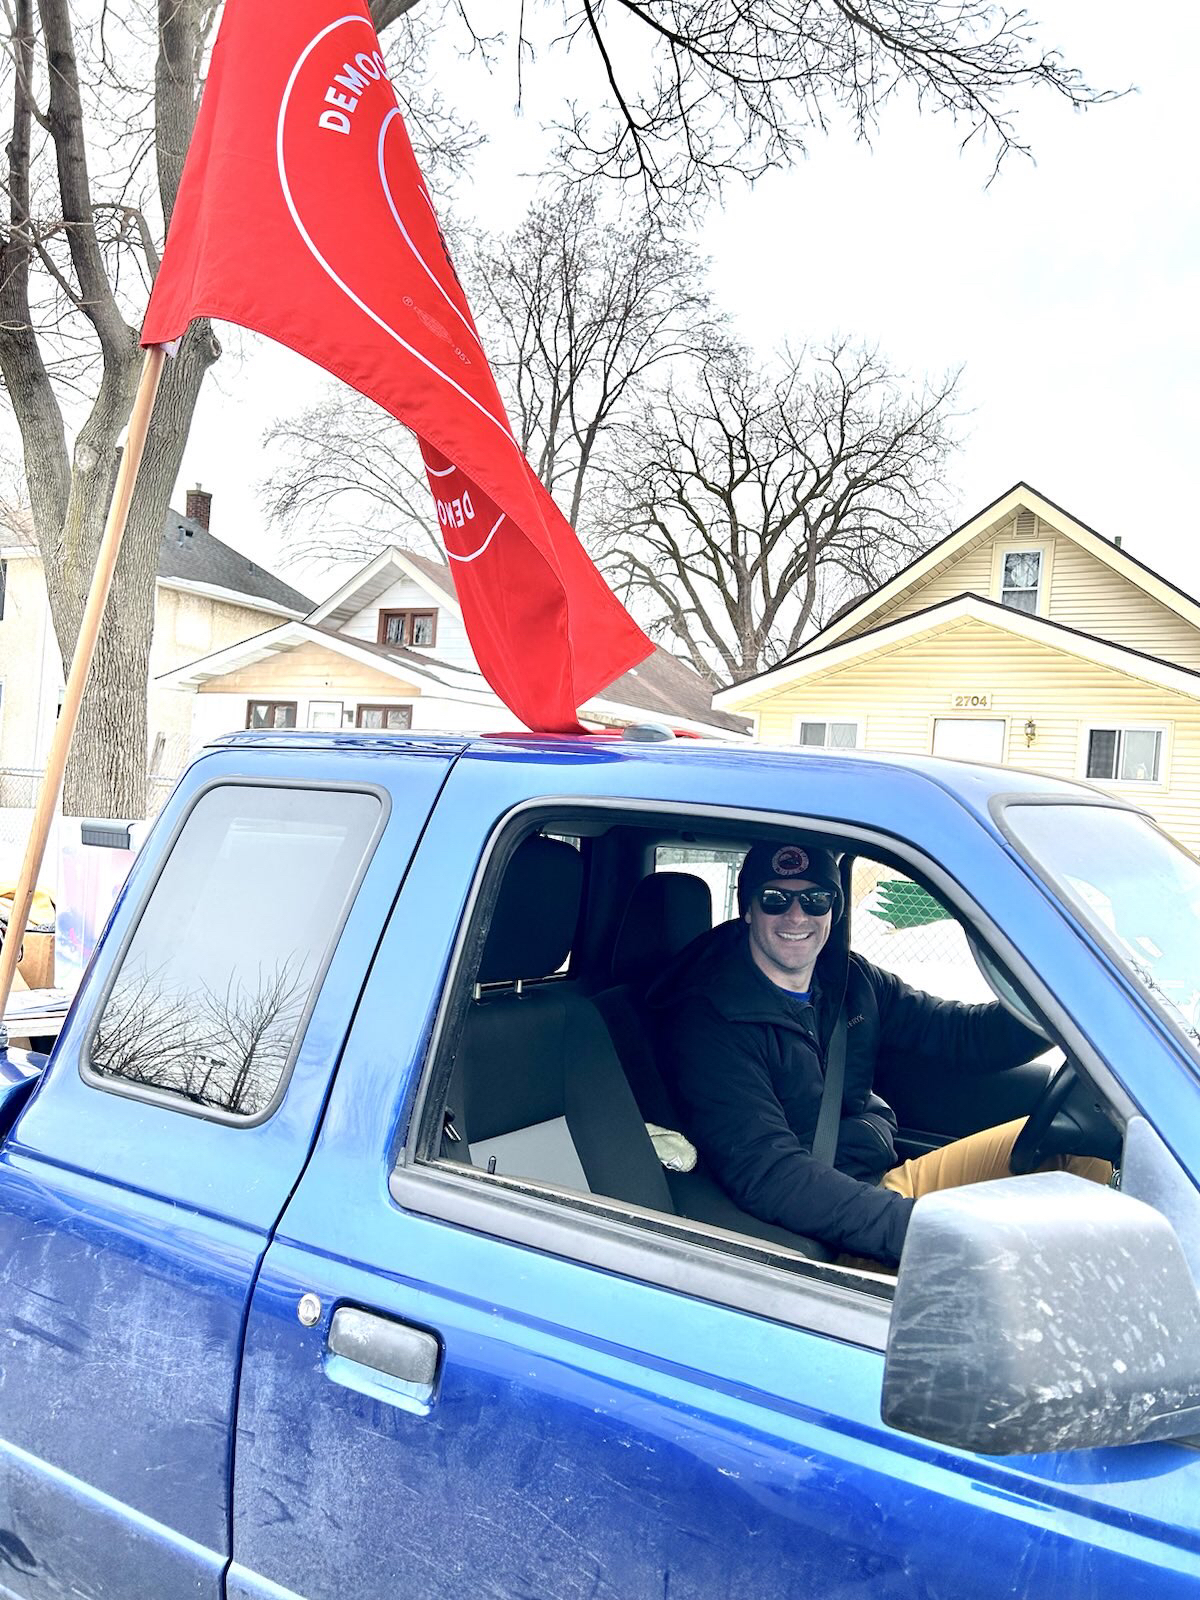 Smiling young white guy in blue truck with a red flag on it.